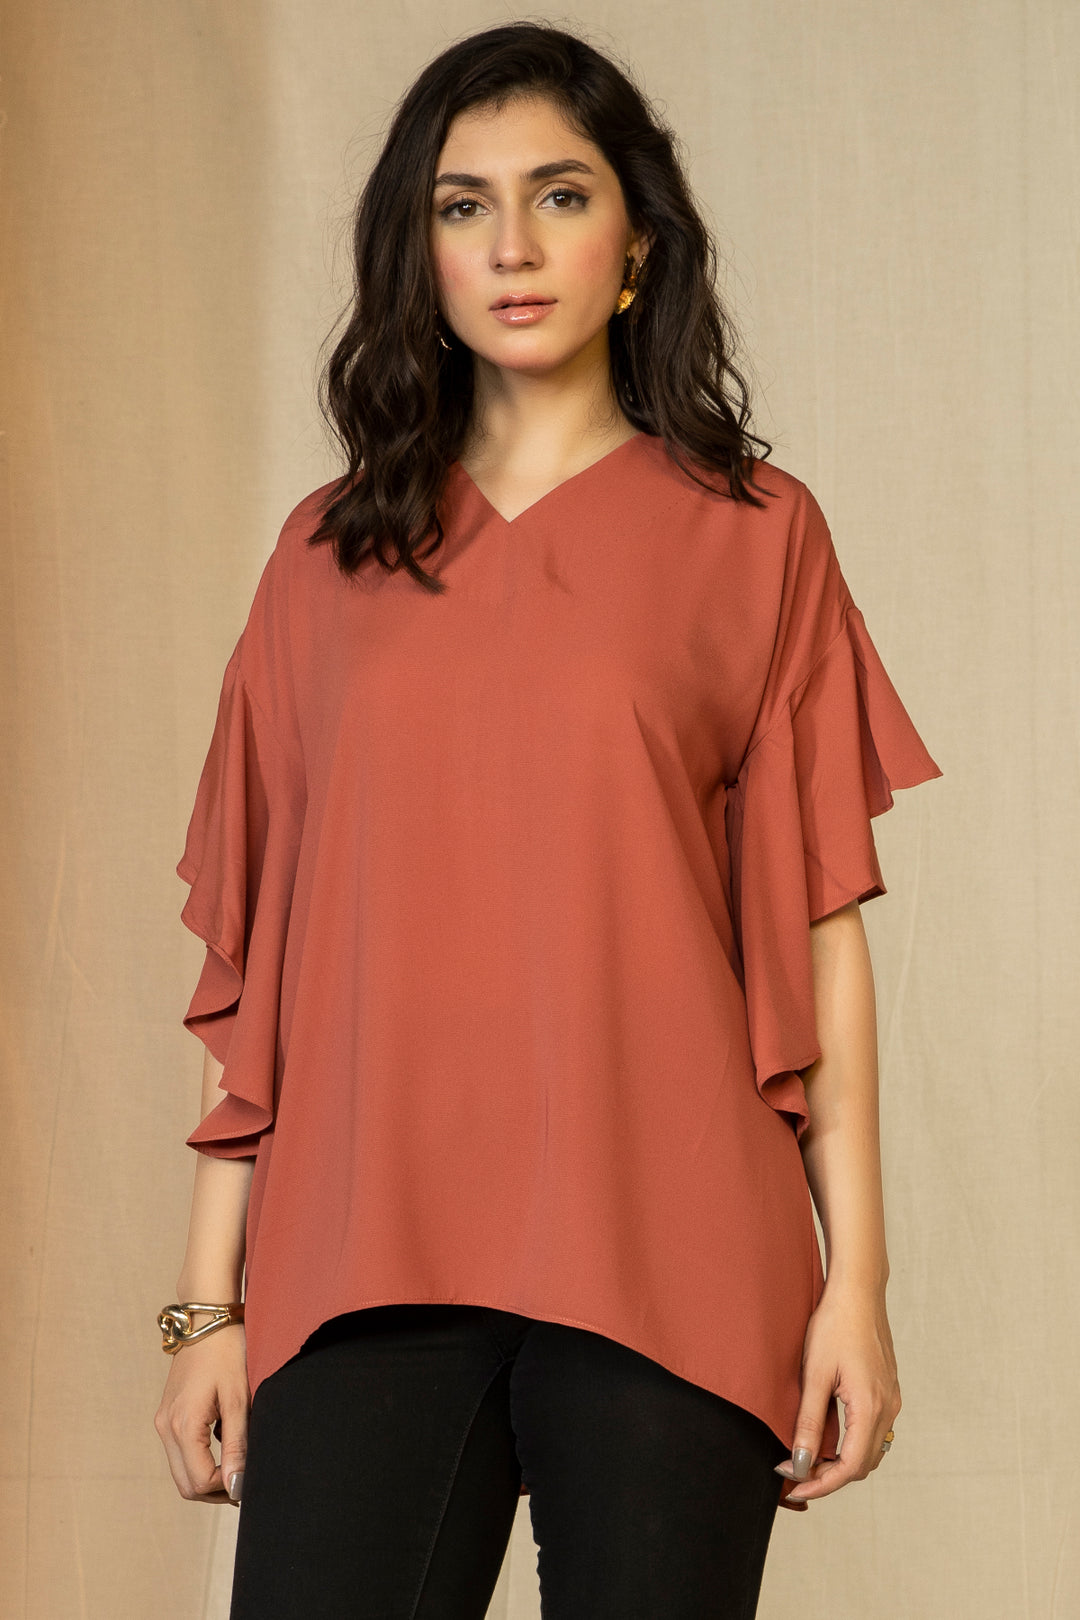 Flared Sleeves Top - A21 - WWT0010